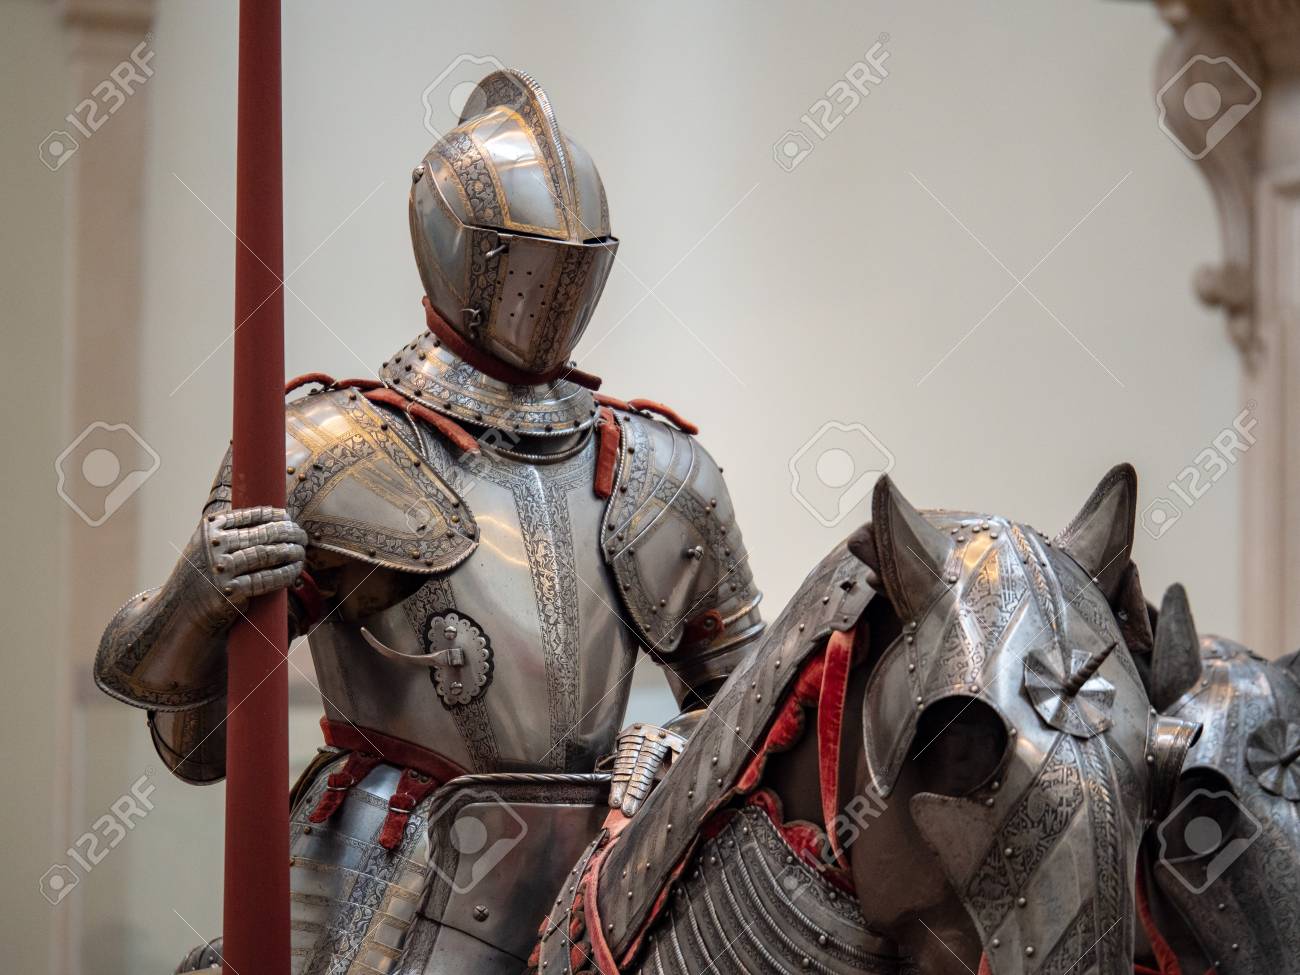 103032478-an-exhibition-of-15th-century-german-plate-armor-around-the-time-of-late-middle-ages-the-knight-hold.jpg